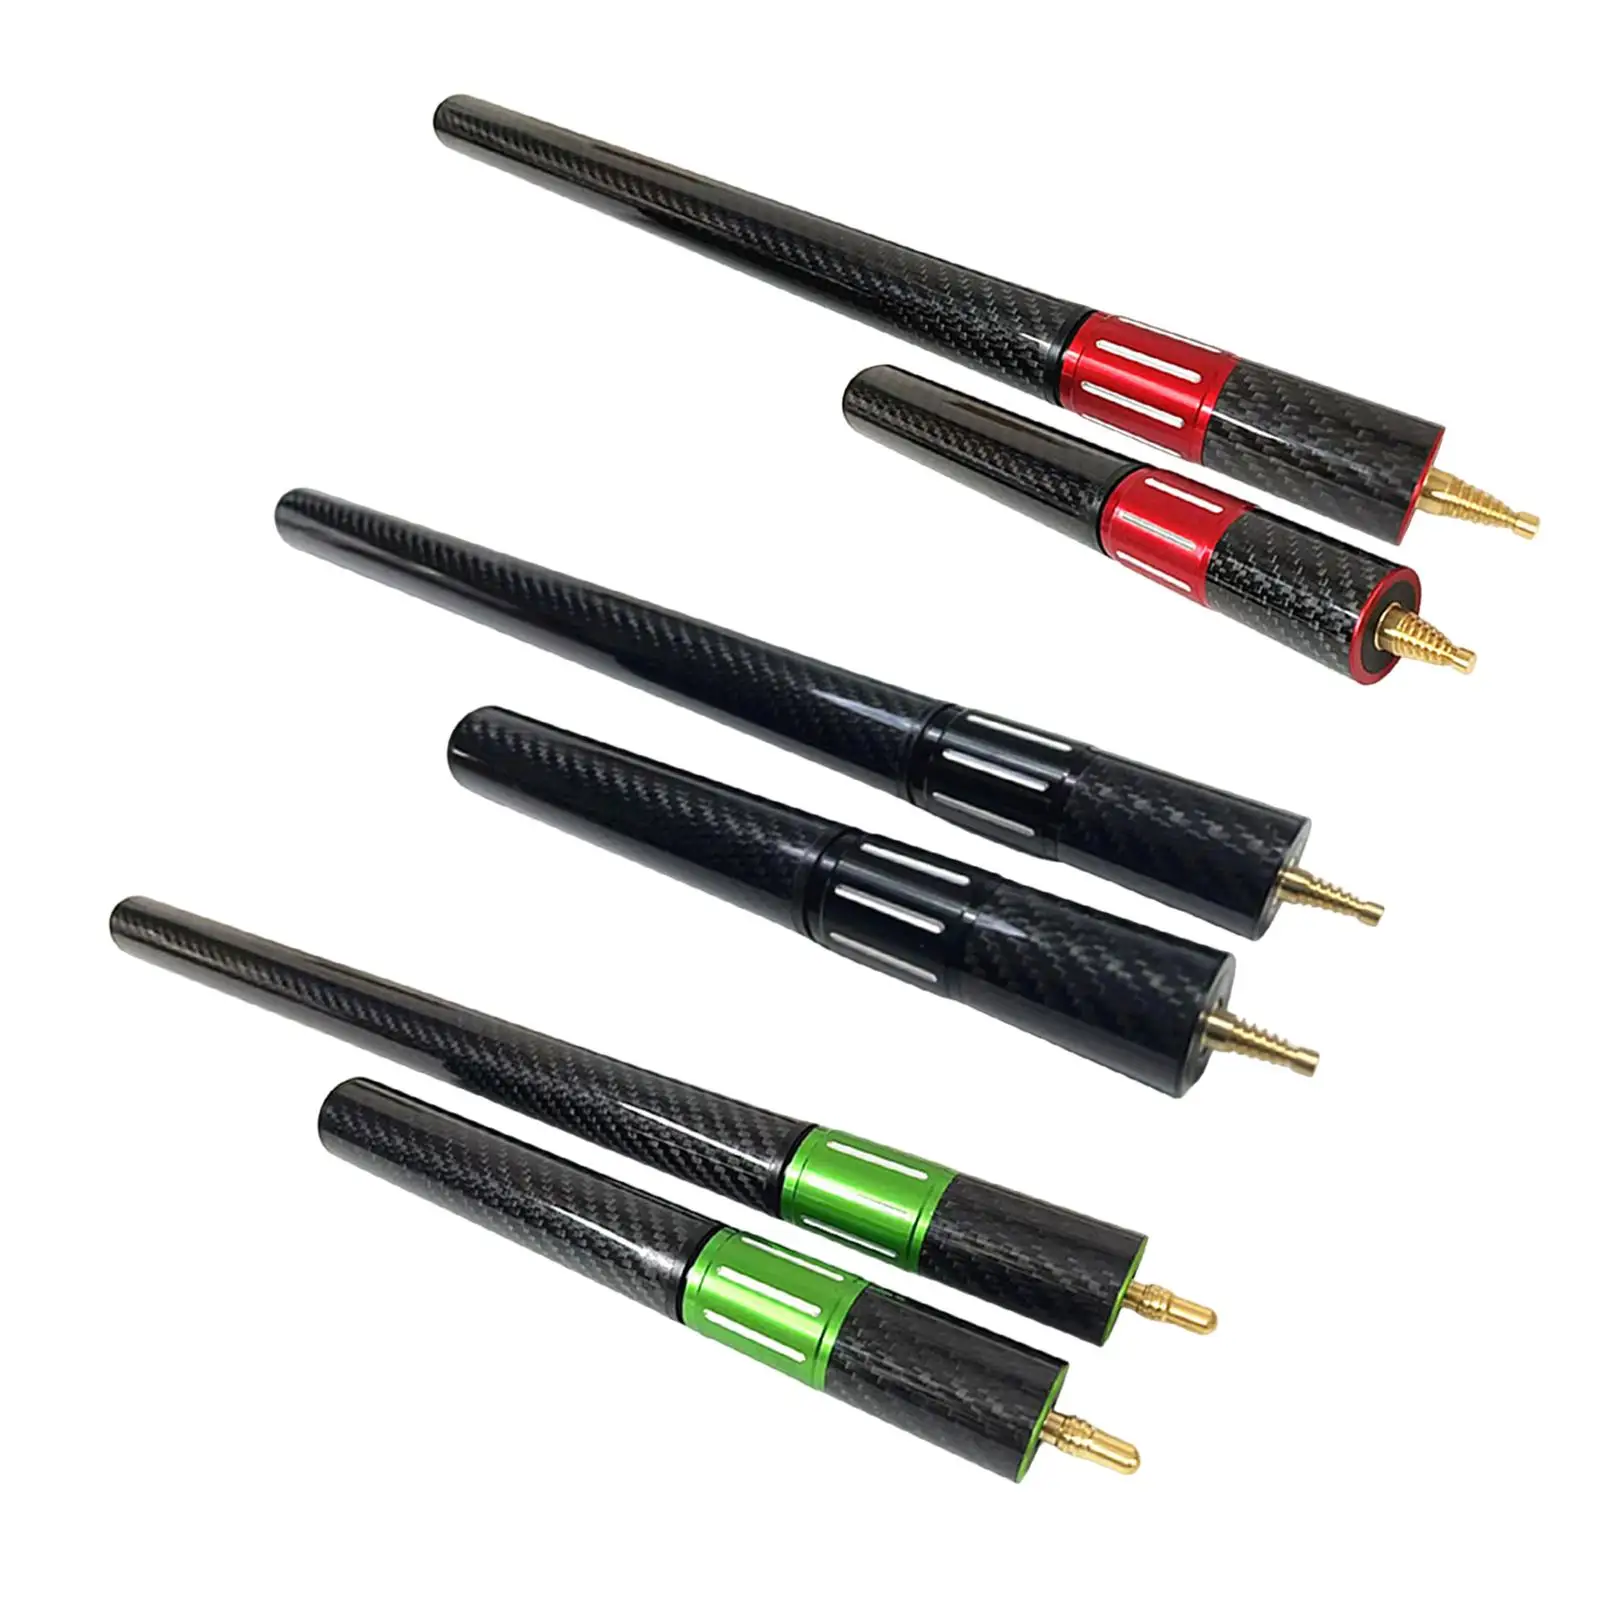 2x Pool Cue Extender Telescopic Durable Portable Snookers Cue Extension for